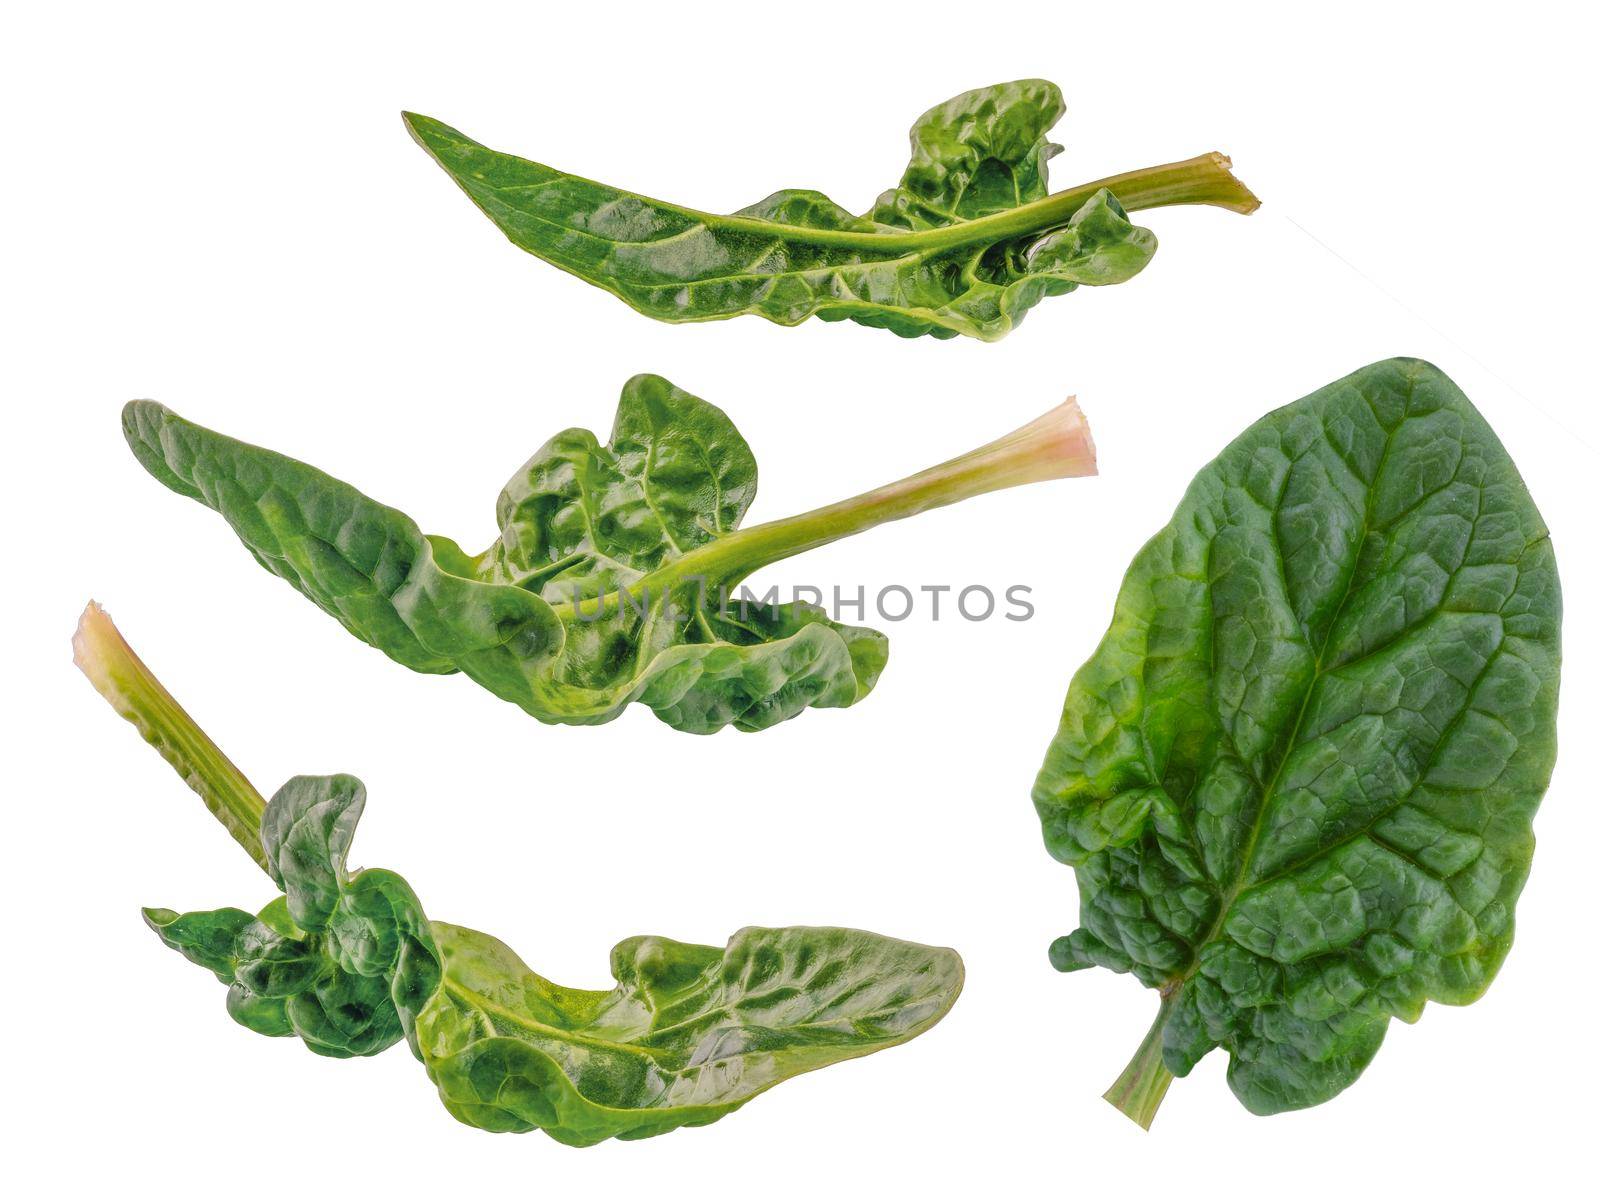 Spinach leaves isolated on white background.